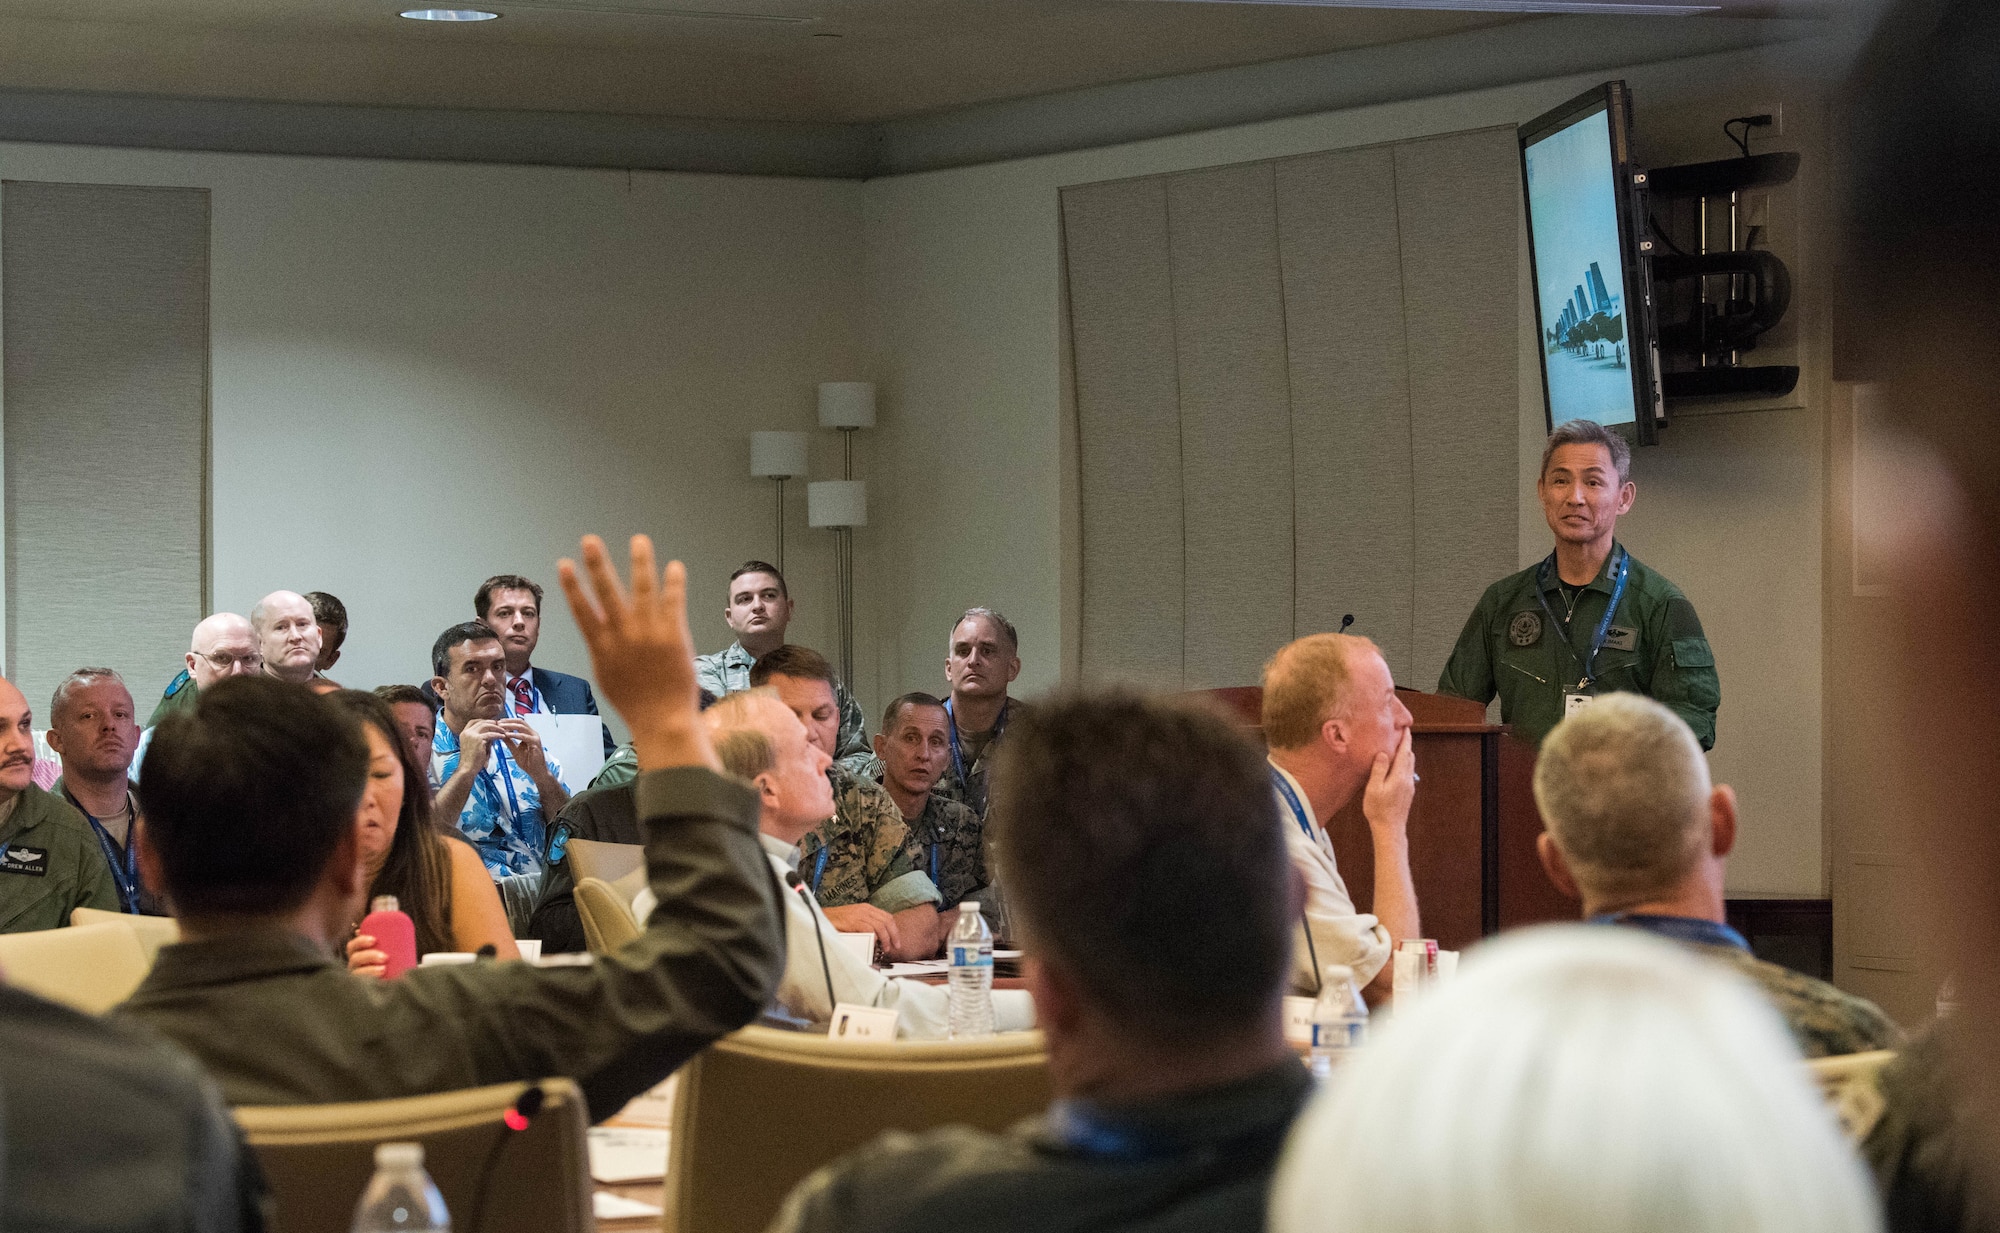 Koku Jieitai (Japan Air Self-Defense Force) Maj. Gen. Koji Imaki, Director of Defense Pans & Operations, gives a country update briefing during the Pacific F-35 Users Group Conference at Headquarters Pacific Air Forces, Joint Base Pearl Harbor-Hickam, Hawaii, March 13, 2019.